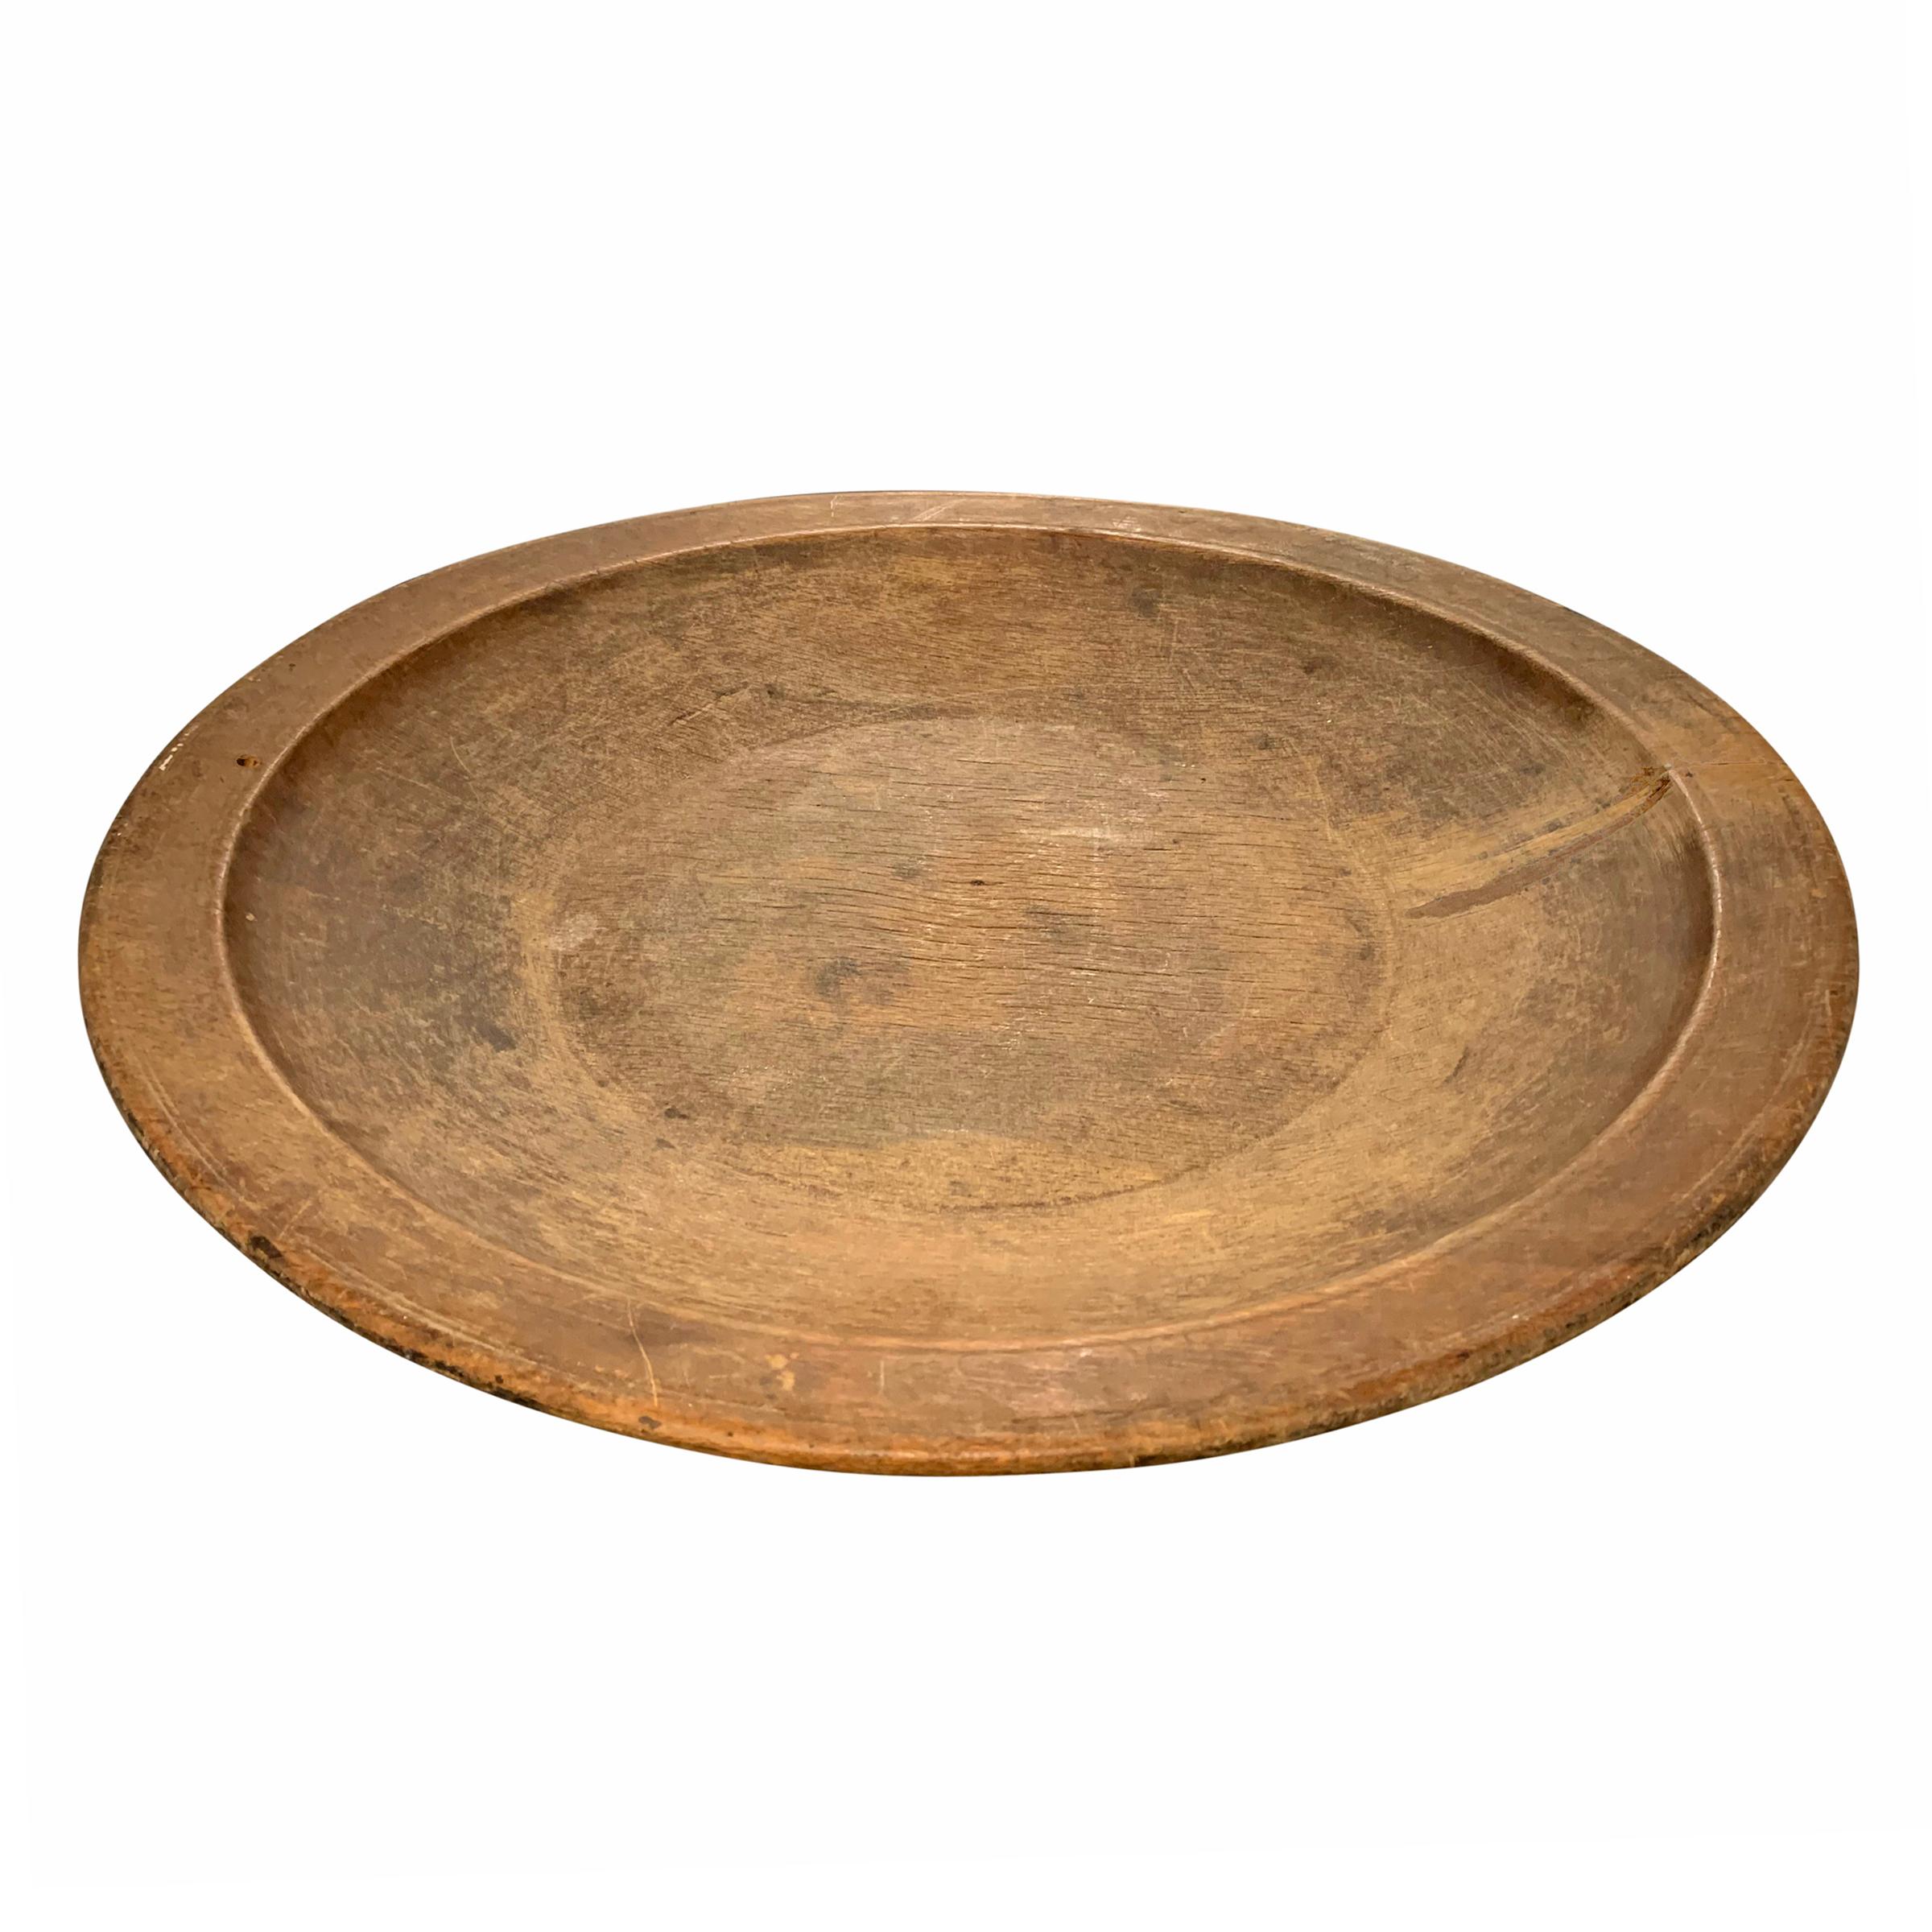 An incredible 18th century American turned wood tray with a wide rim, wonderful incised lines on the exterior, and a patina only time can bestow.